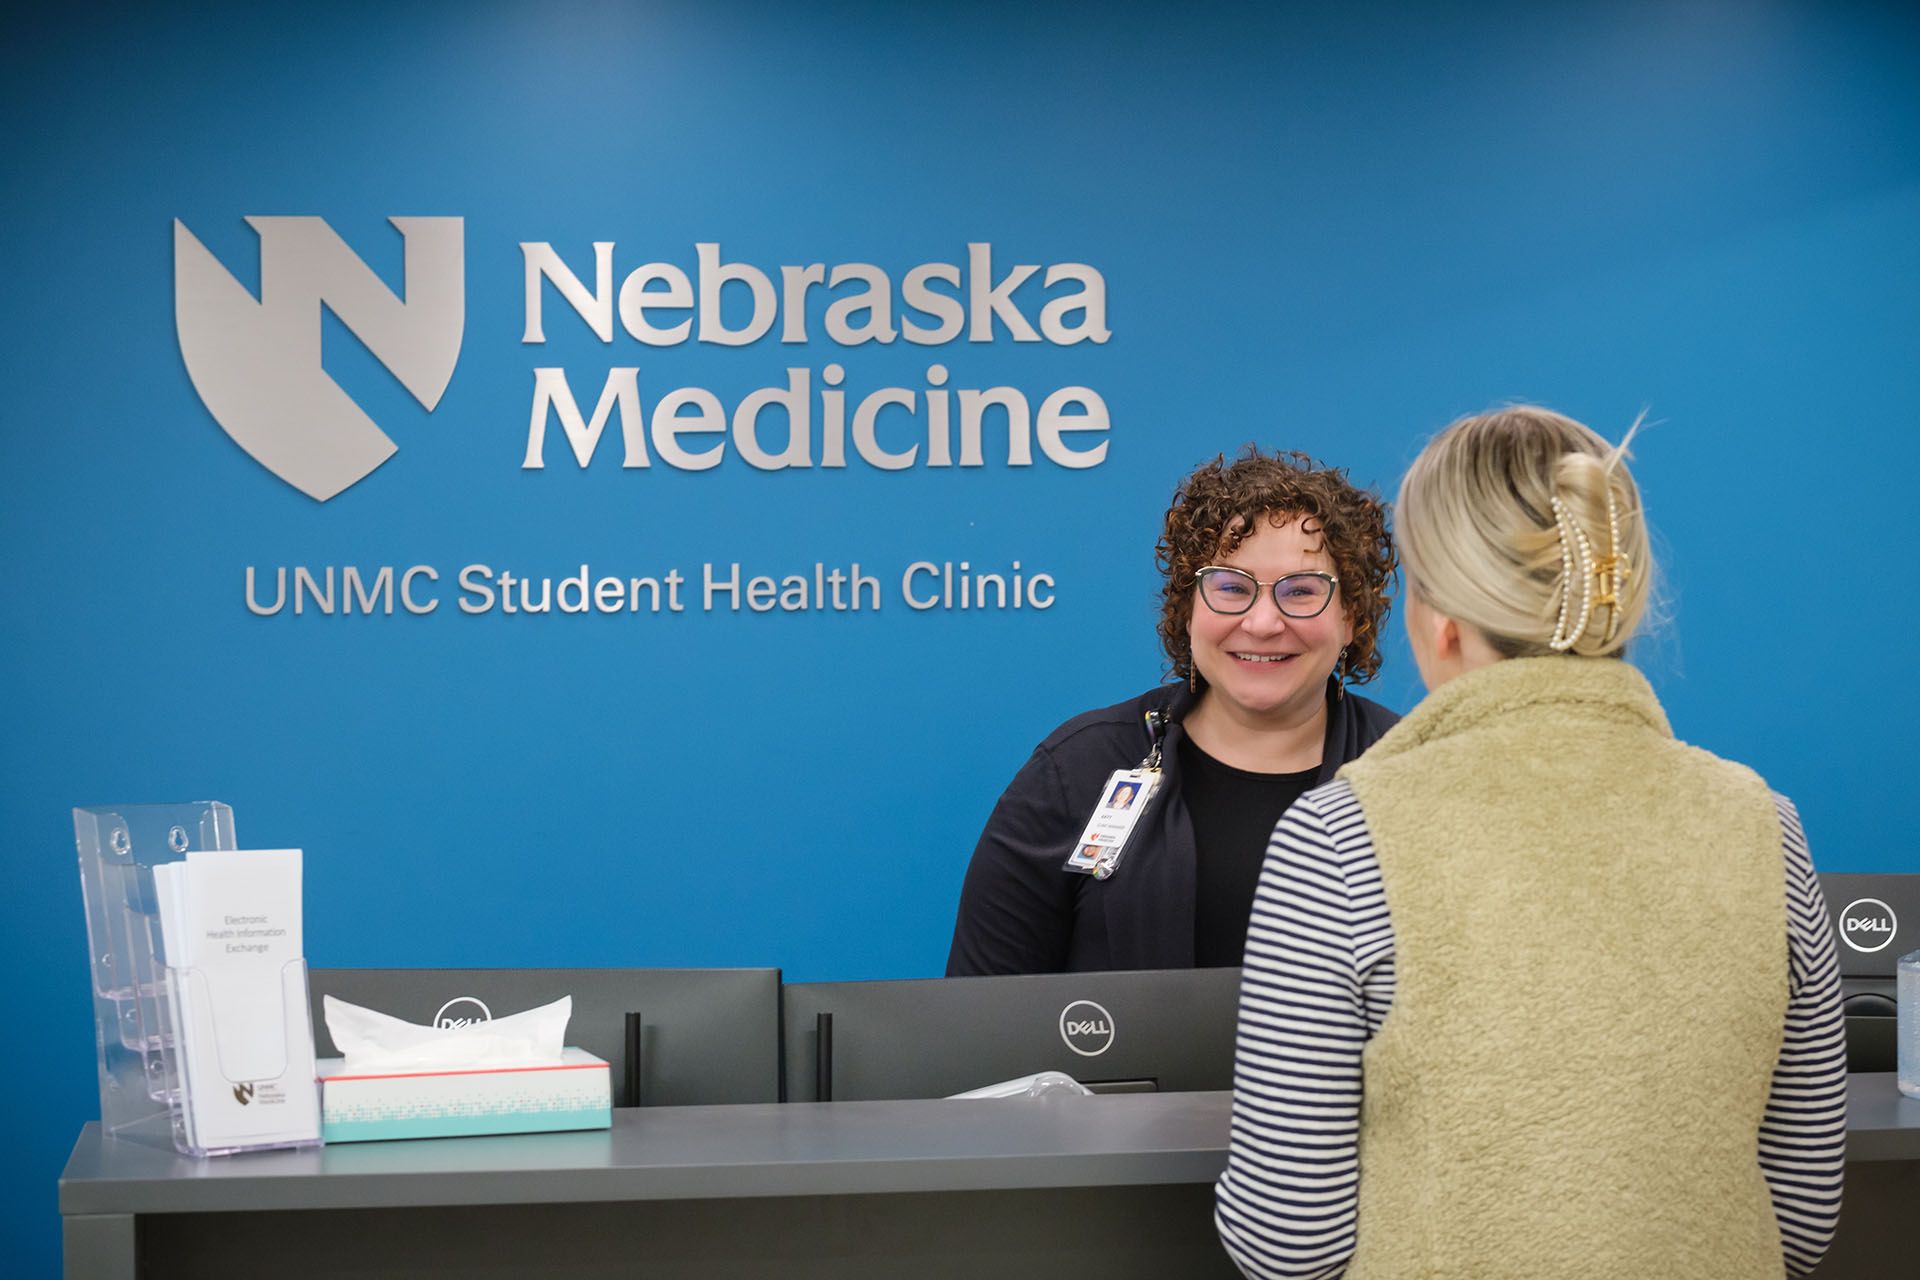 Nebraska Medicine&apos;s Katy Stratman &lpar;behind the front desk&rpar; is the clinic manager for the new Nebraska Medicine UNMC Student Health Clinic&period; Earlier this week&comma; she was at the clinic preparing for its opening&period;